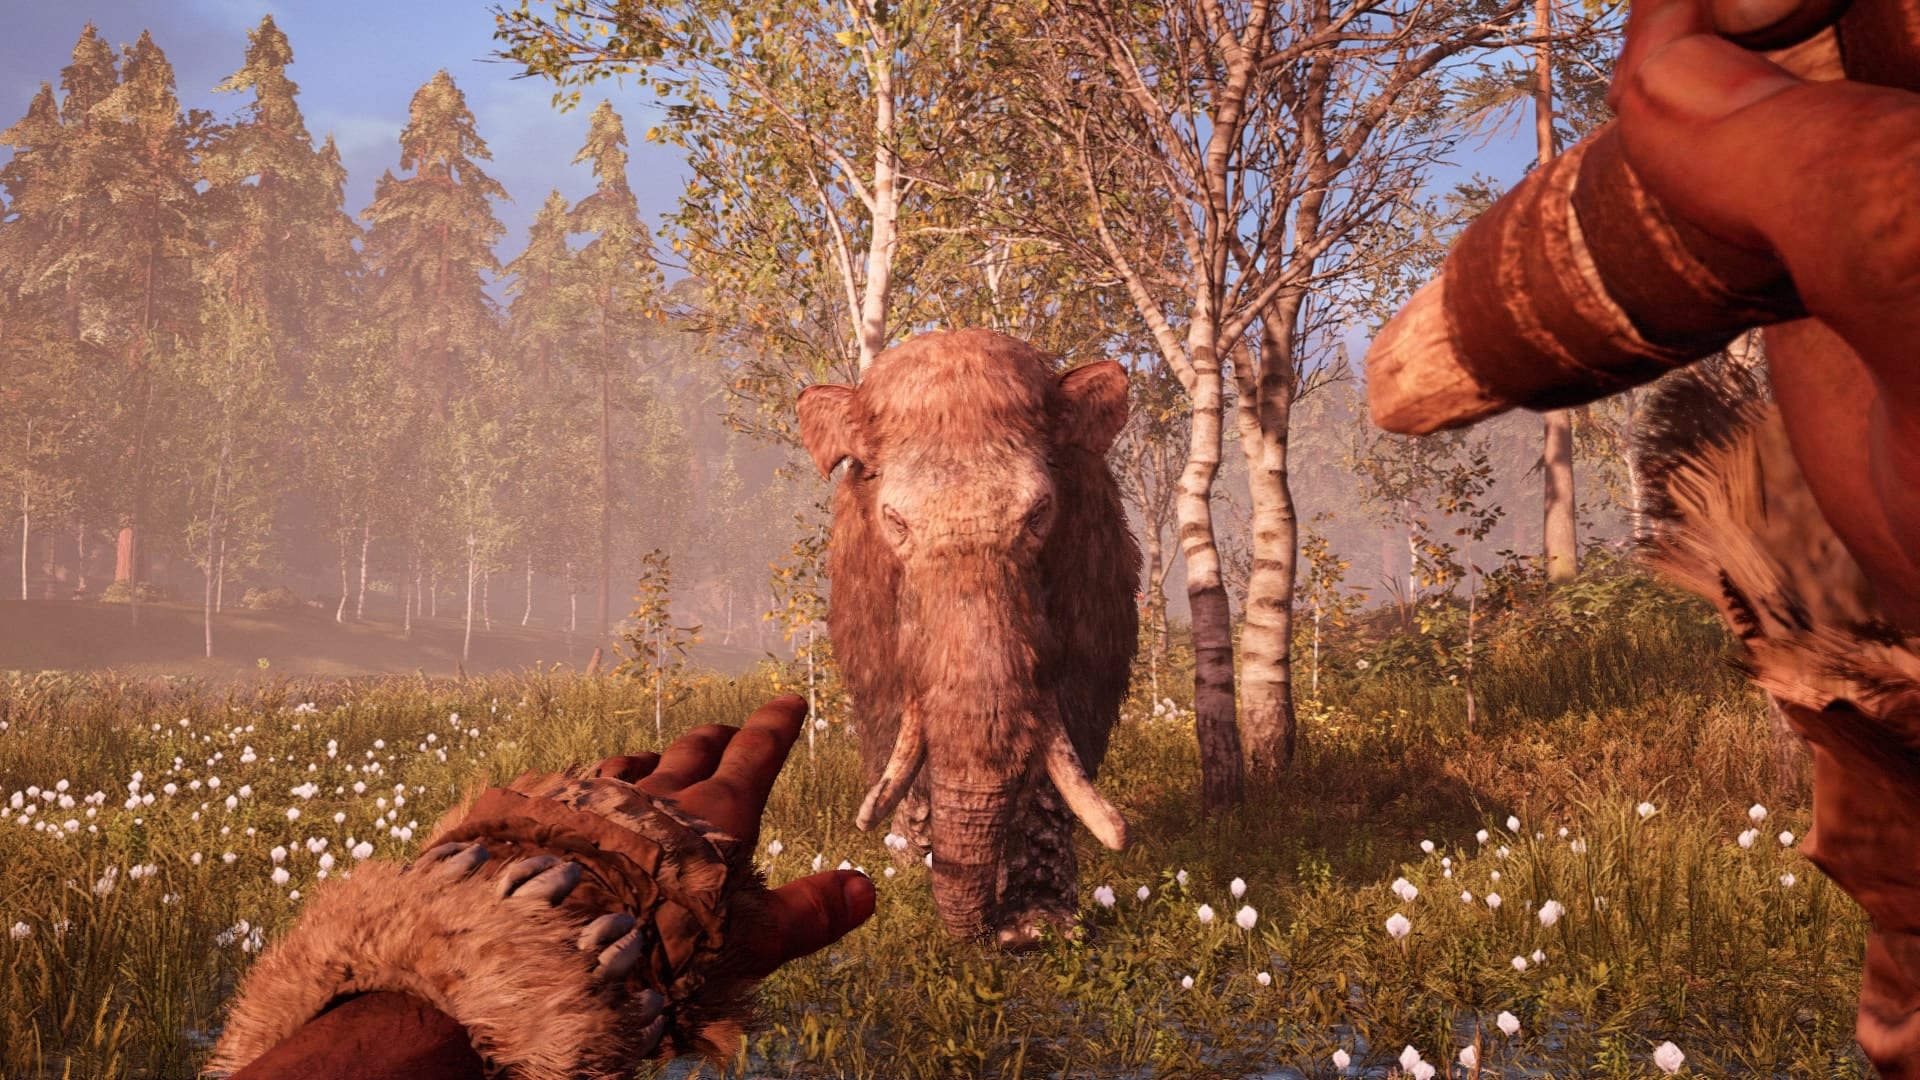 4 seconds later I was dead. Lesson learned: don’t f*ck with a mammoth.